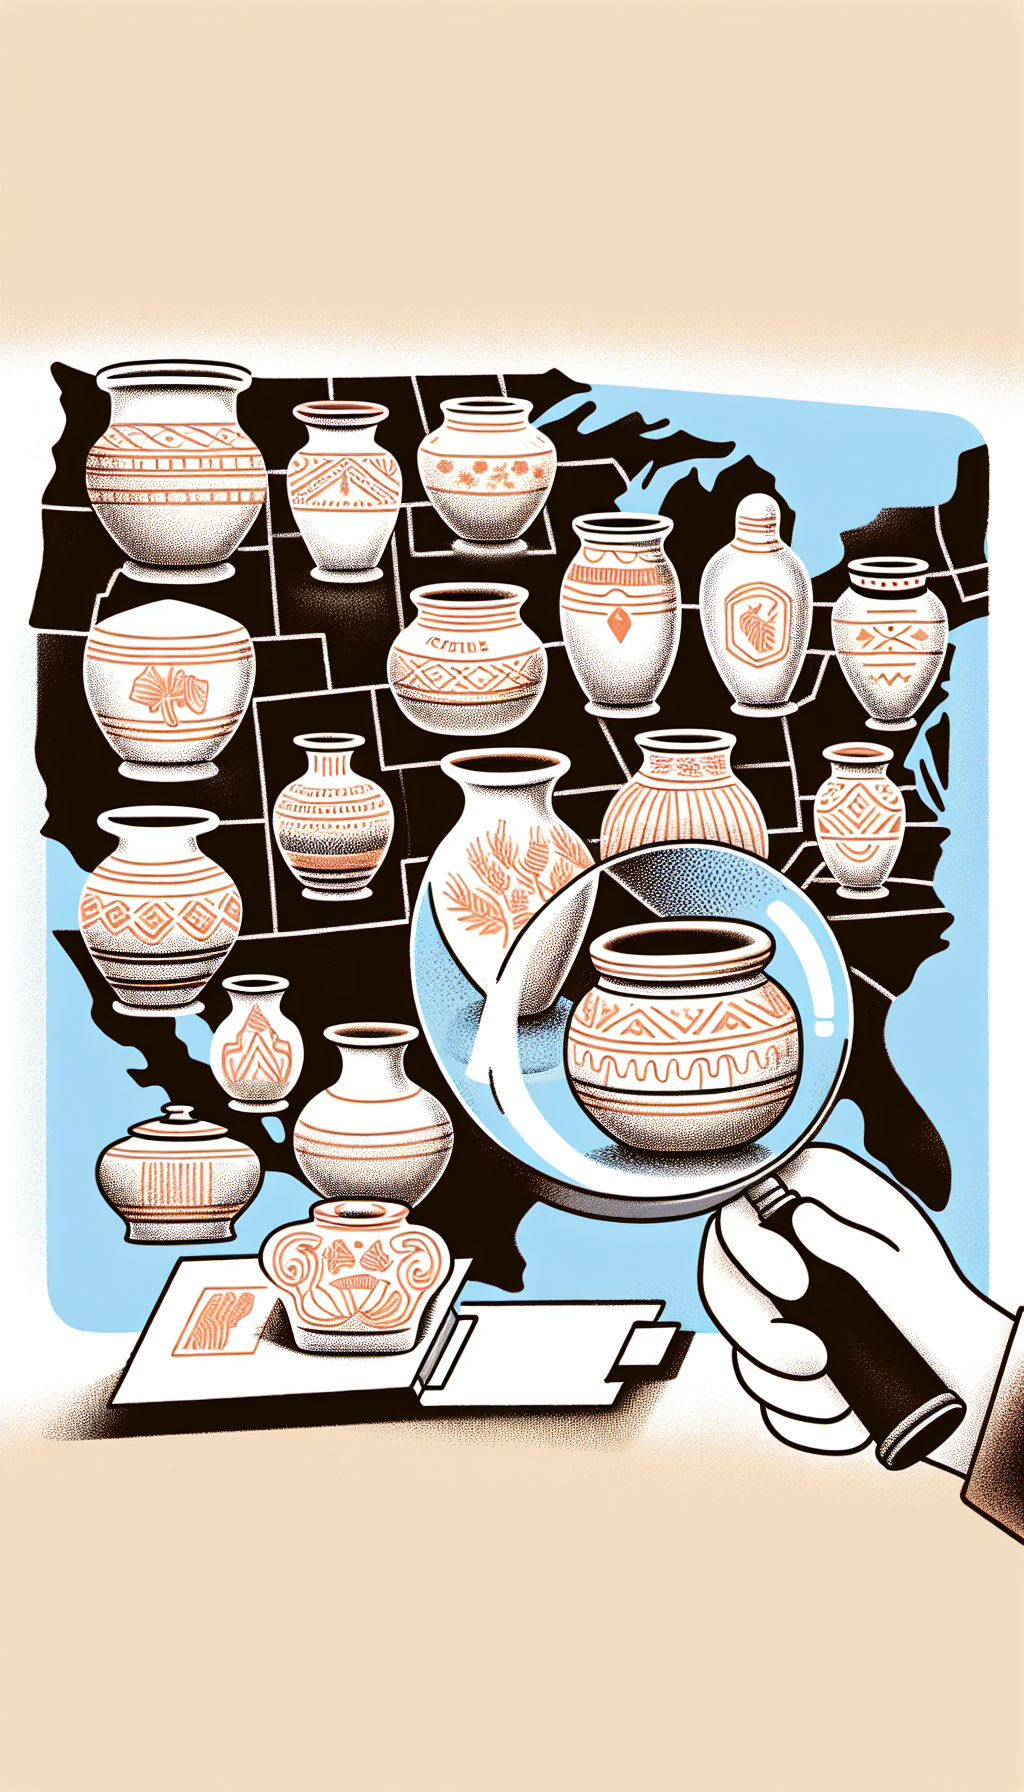 An illustration depicting a map with whimsical, semi-transparent outlines of various antique stoneware crocks floating over their regions of origin. Each crock bears distinctive markings and patterns emblematic of local styles, and a magnifying glass hovers over one, highlighting the unique etched insignia that aids in identification, subtly suggesting the detective work involved in tracing stoneware provenance.